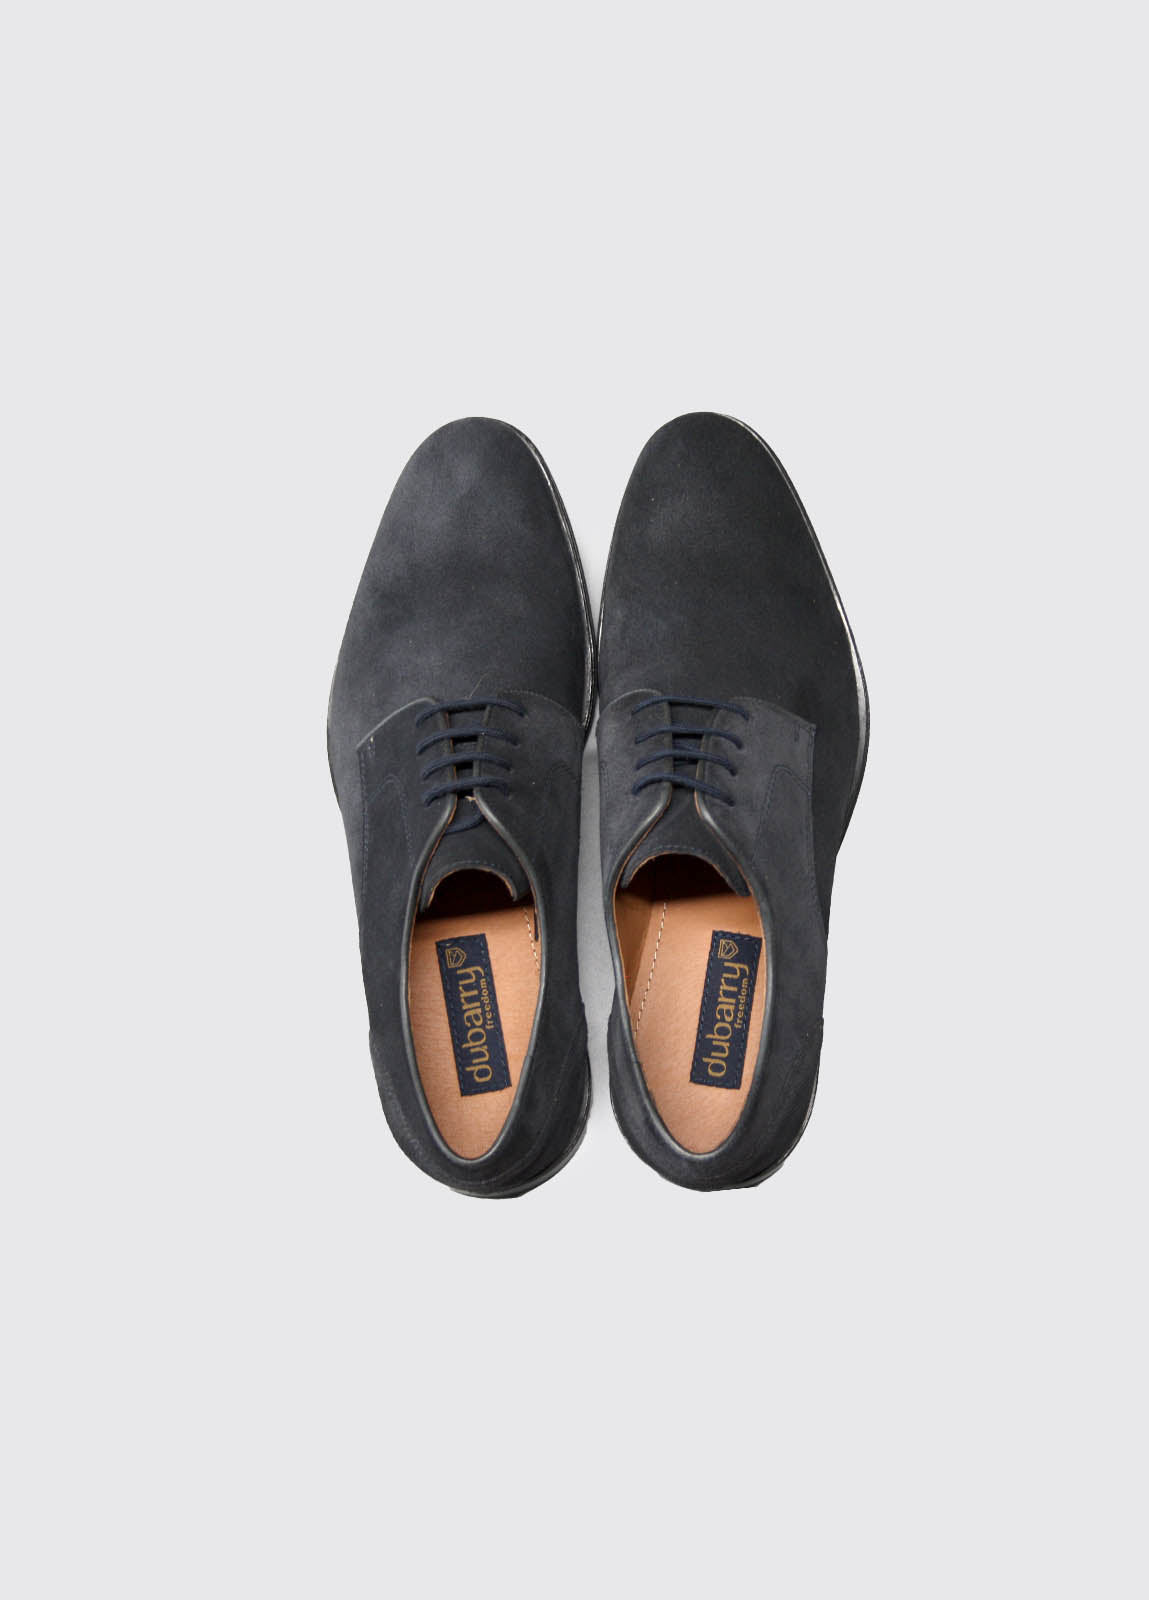 Sarge Navy Suede Shoe-Top down view